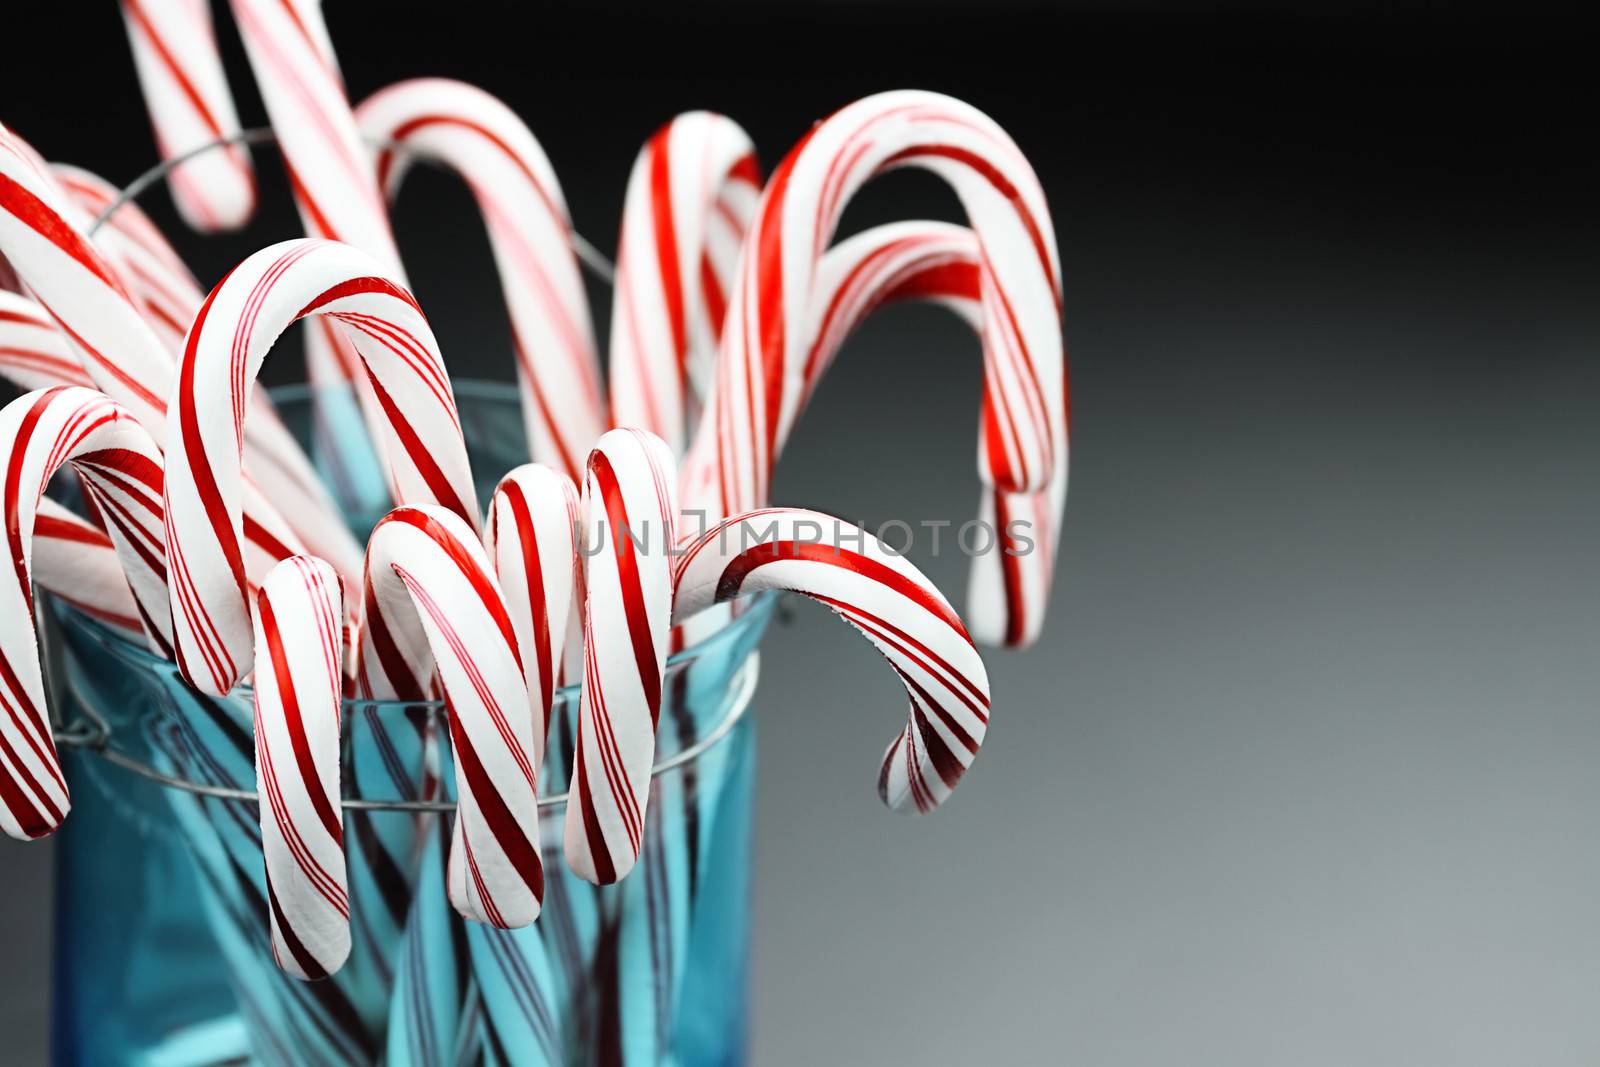 Jar of candy canes against a grey background with copy space.